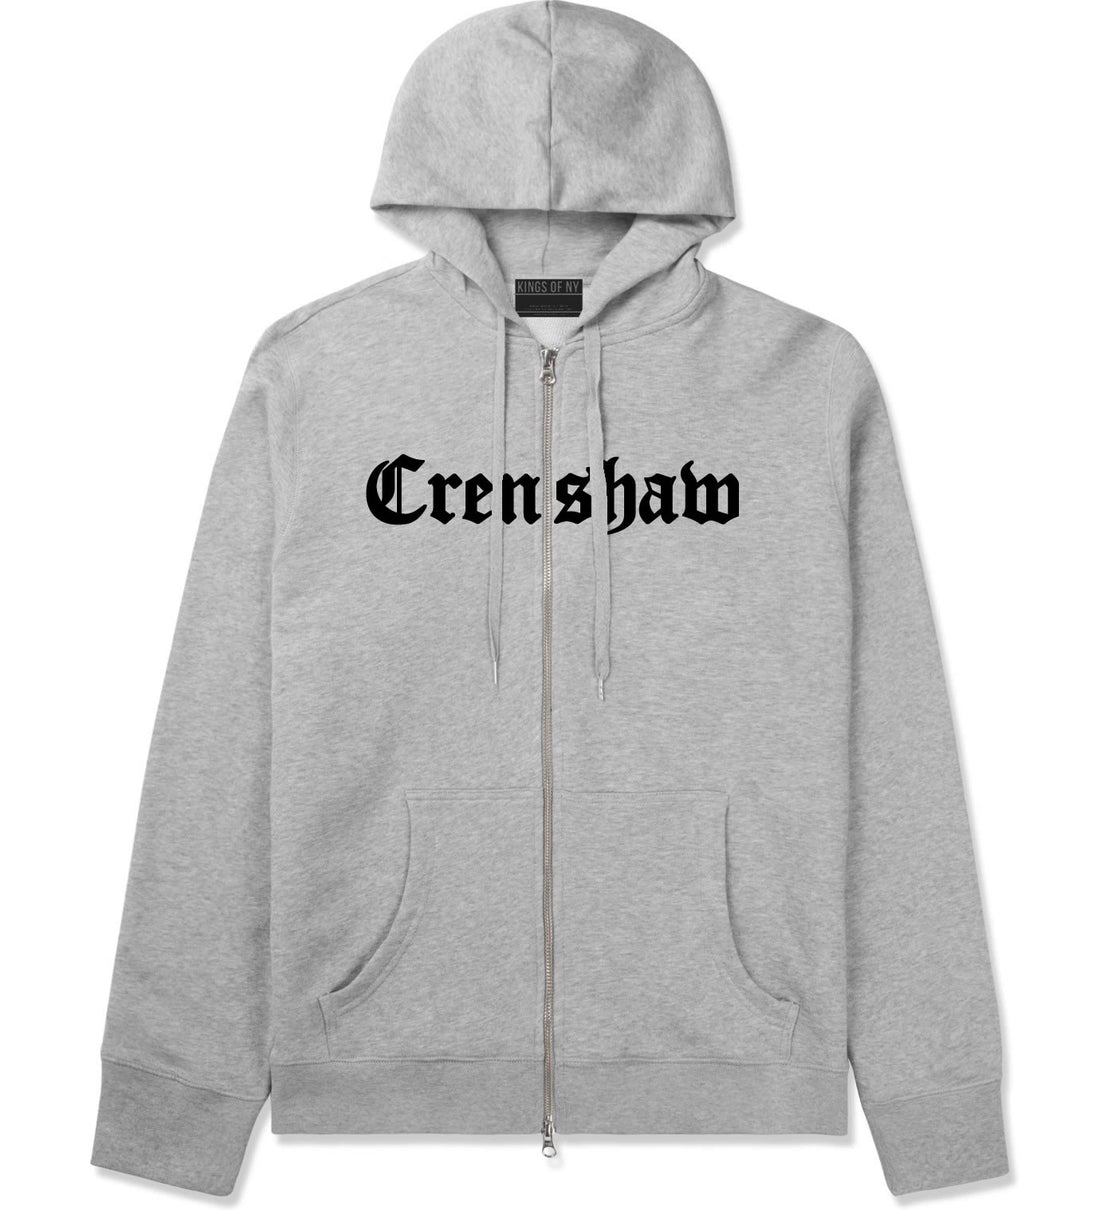 Crenshaw Old English California Zip Up Hoodie in Grey By Kings Of NY